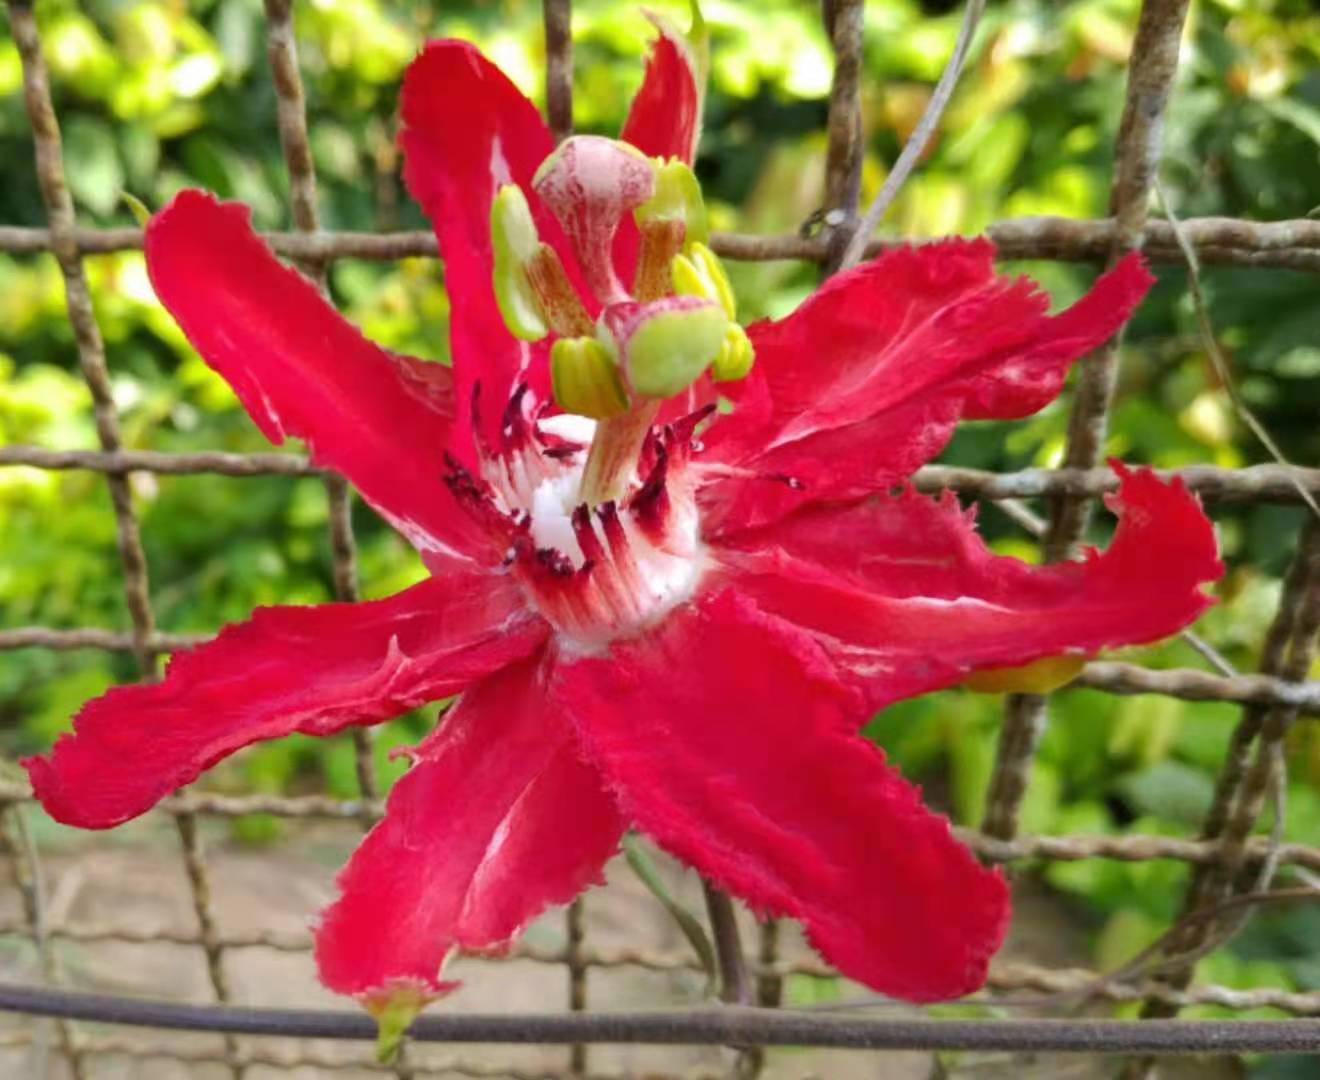 New cultivar of passion flower got registered by Passiflora Society International